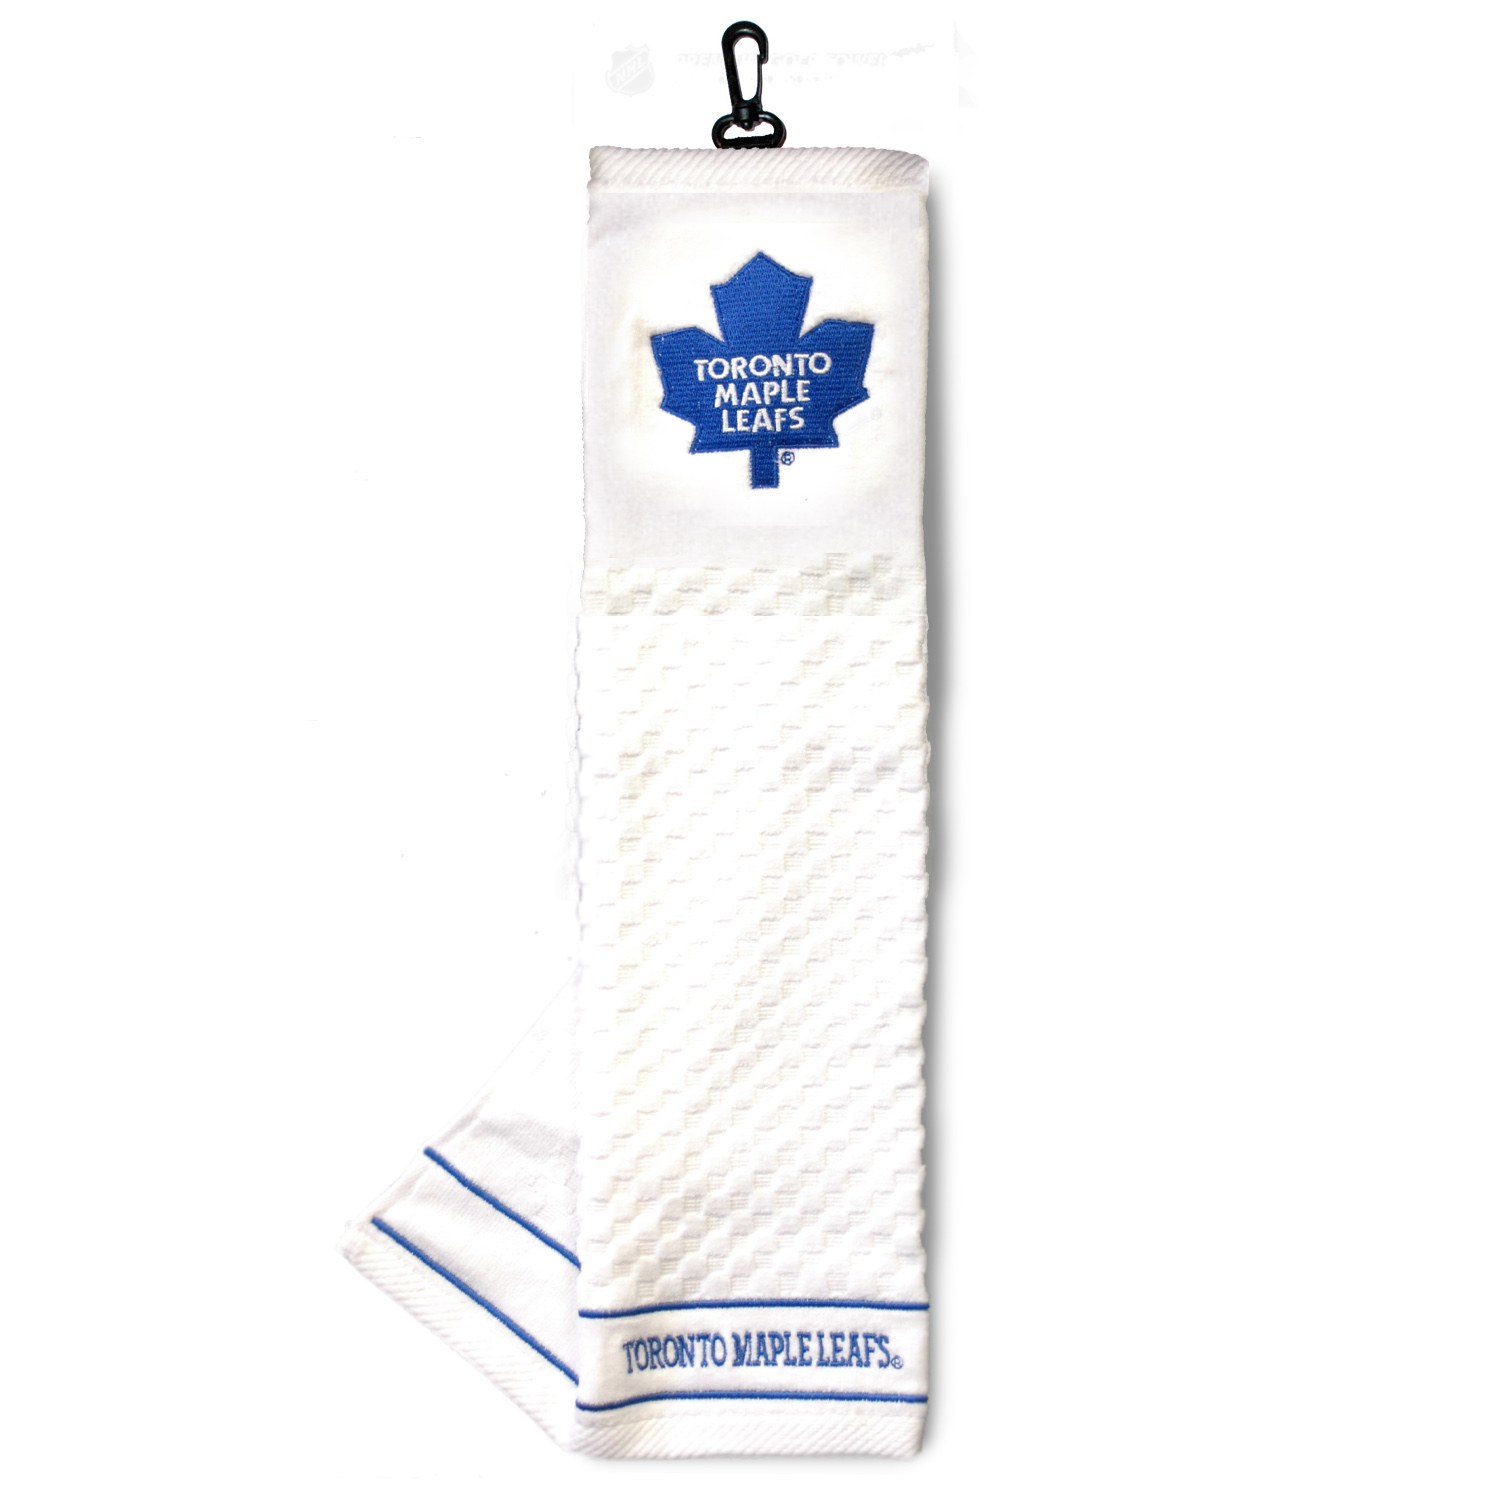 Toronto Maple Leafs Embroidered Towel